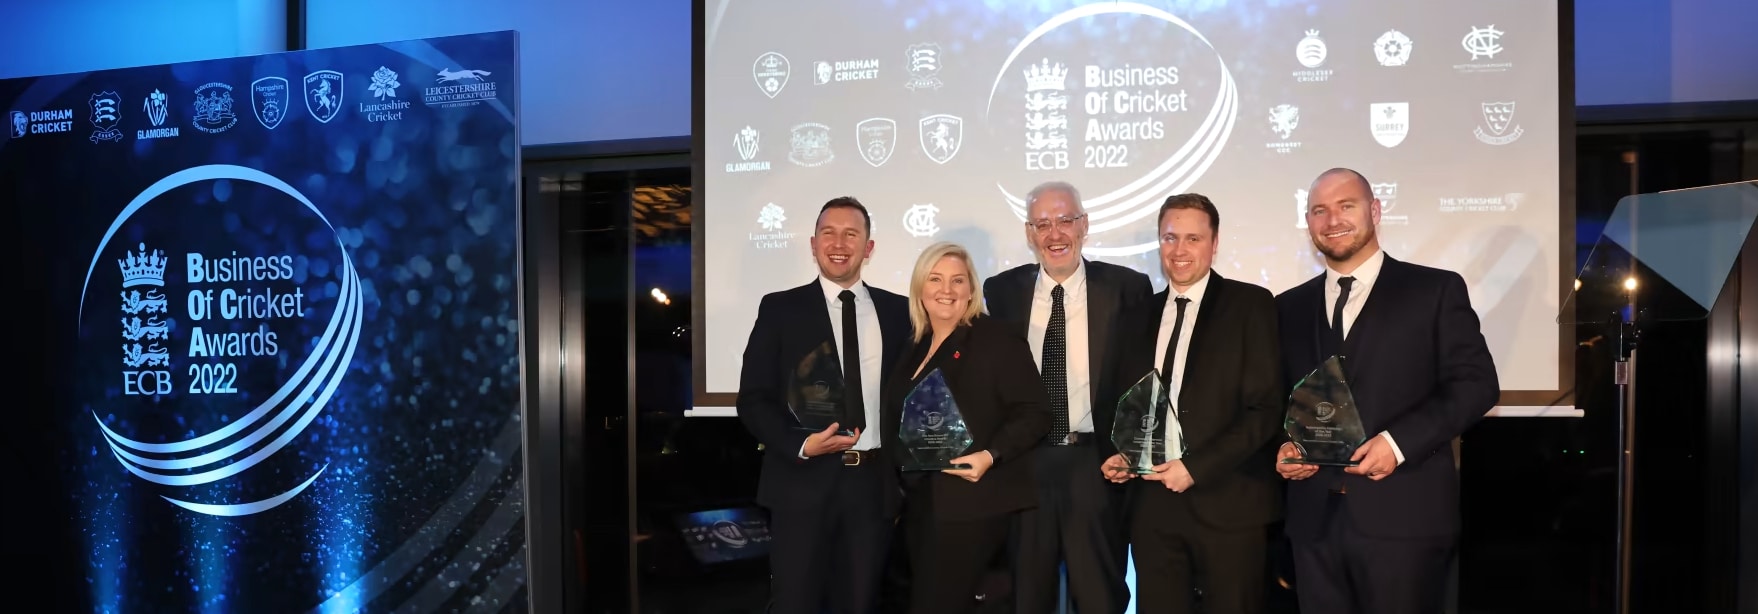 Business of cricket awards